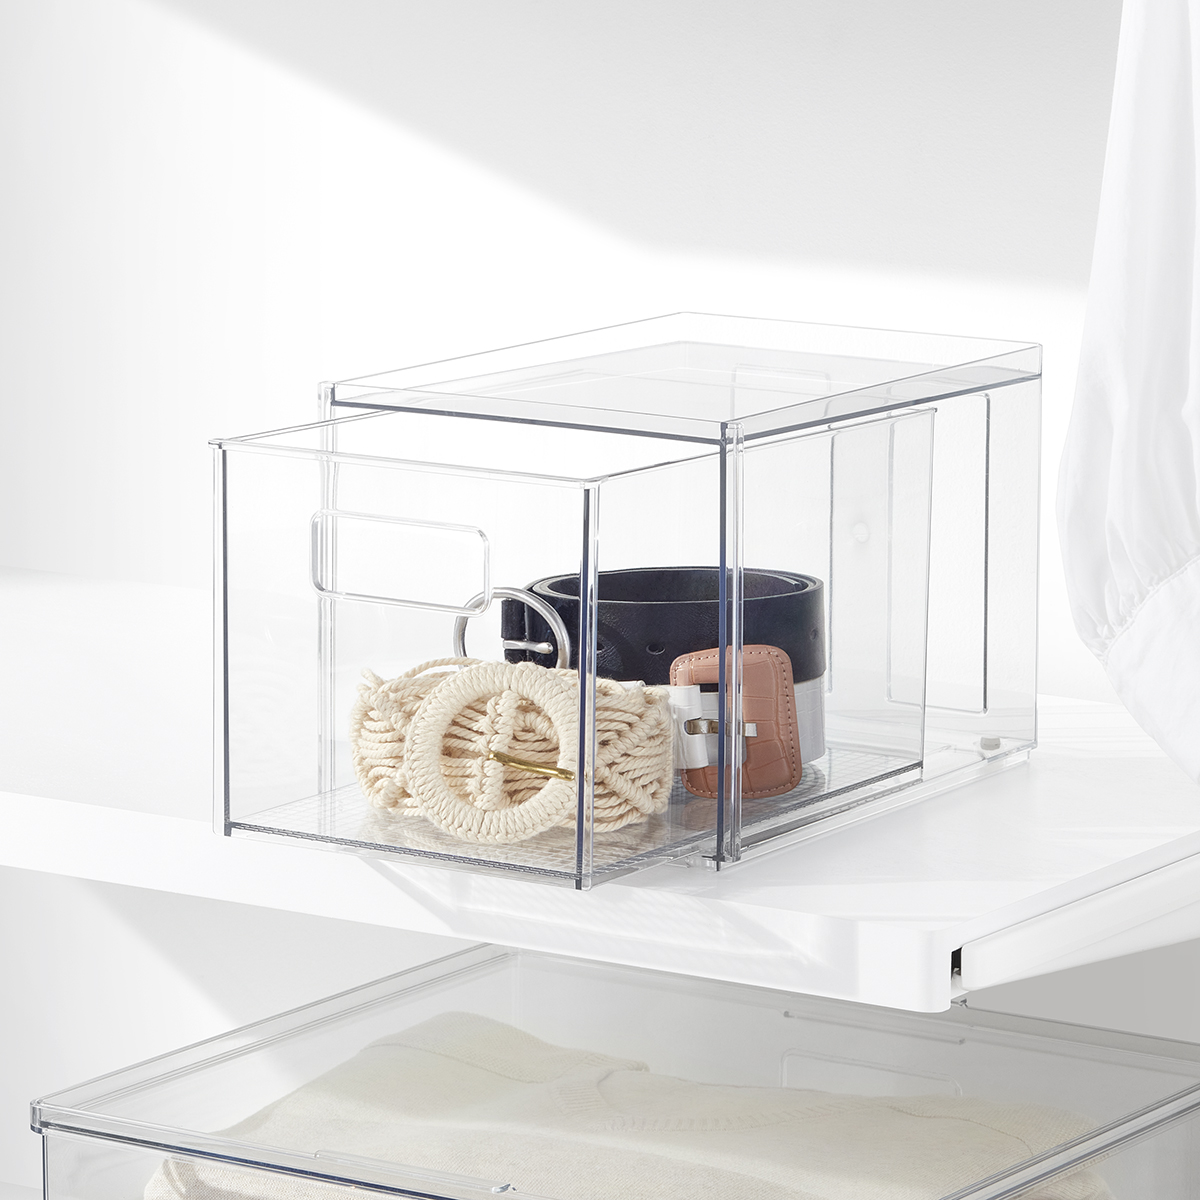 https://www.containerstore.com/catalogimages/486954/10092525-everything-12-inch-drawer-s.jpg